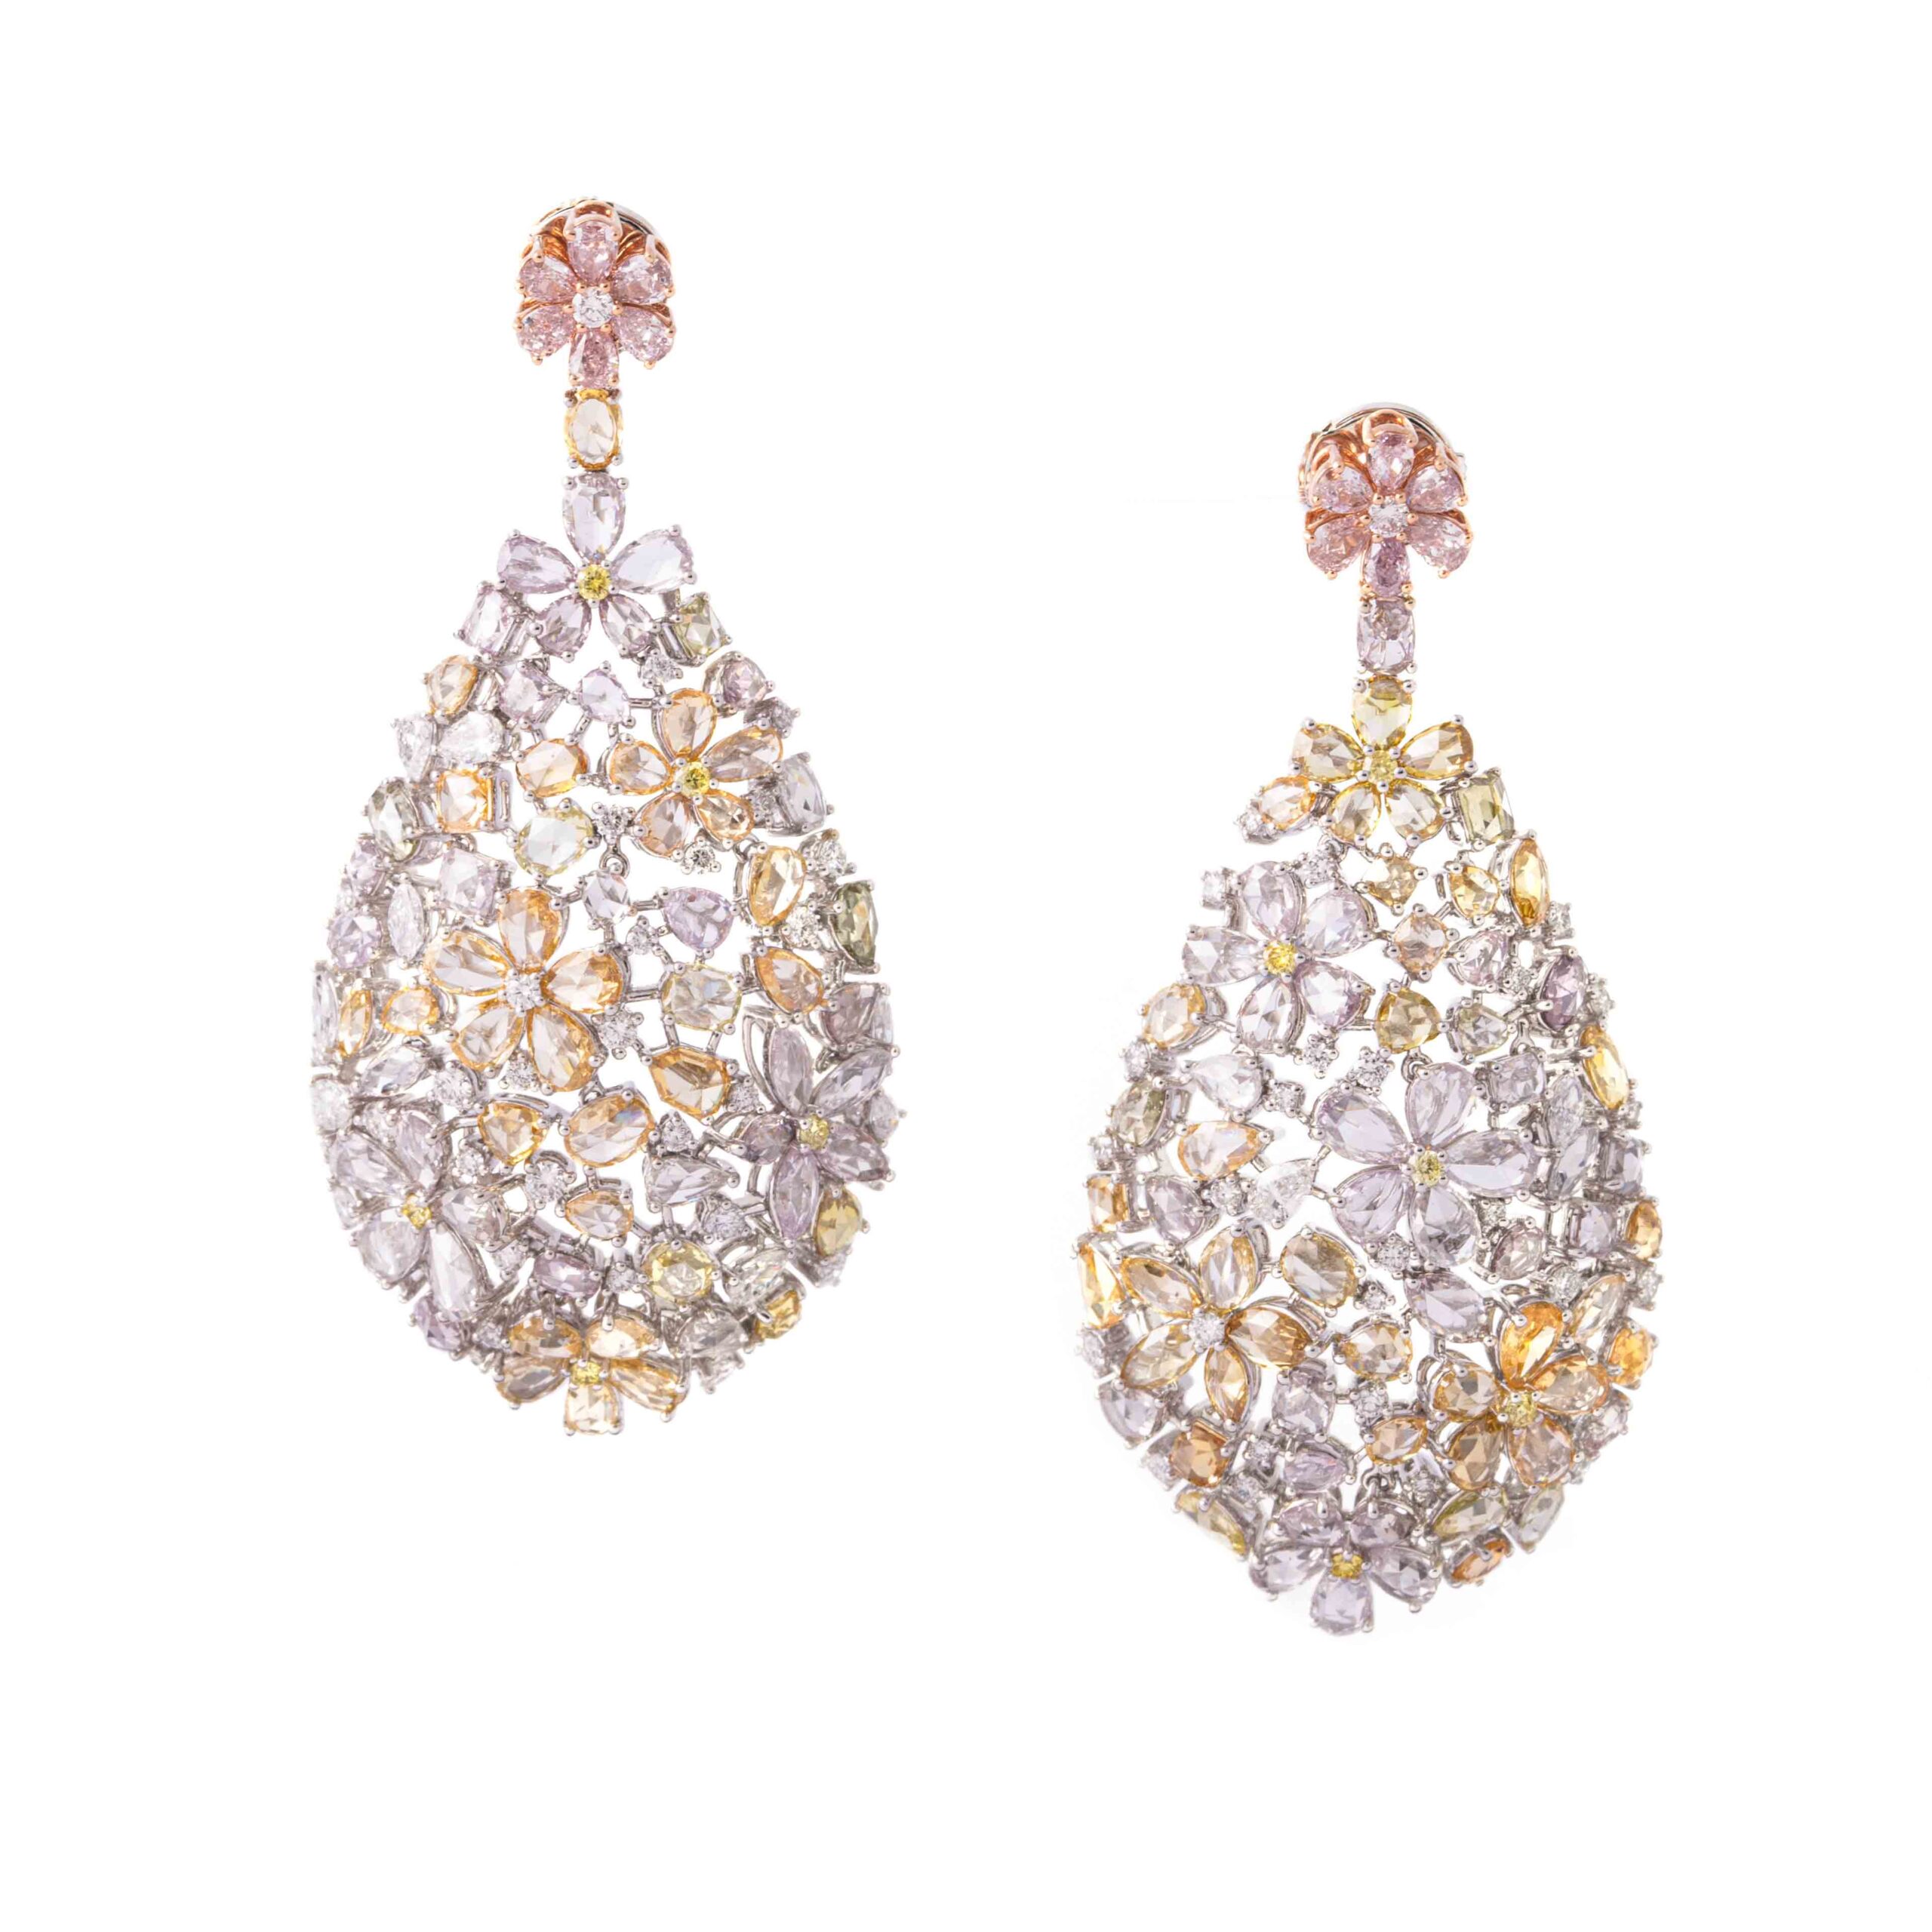 Flower earrings 18kt pink gold. Natural 148 pieces, 14.23 carats VS-F. Natural yellow diamonds, round 10 pieces, 0.17 carats, VS. Natuarl pear 6 pieces, 0.443 carats, VS-F Natural marquise 4 pieces, 0.211 carats, VS-F. Natural round 59 pieces, 0.986 carats, VS-F Total weight: 24.28g Total lenght: approx. 5.8cm Total width: approx. 0.30cm up to 2.60cm